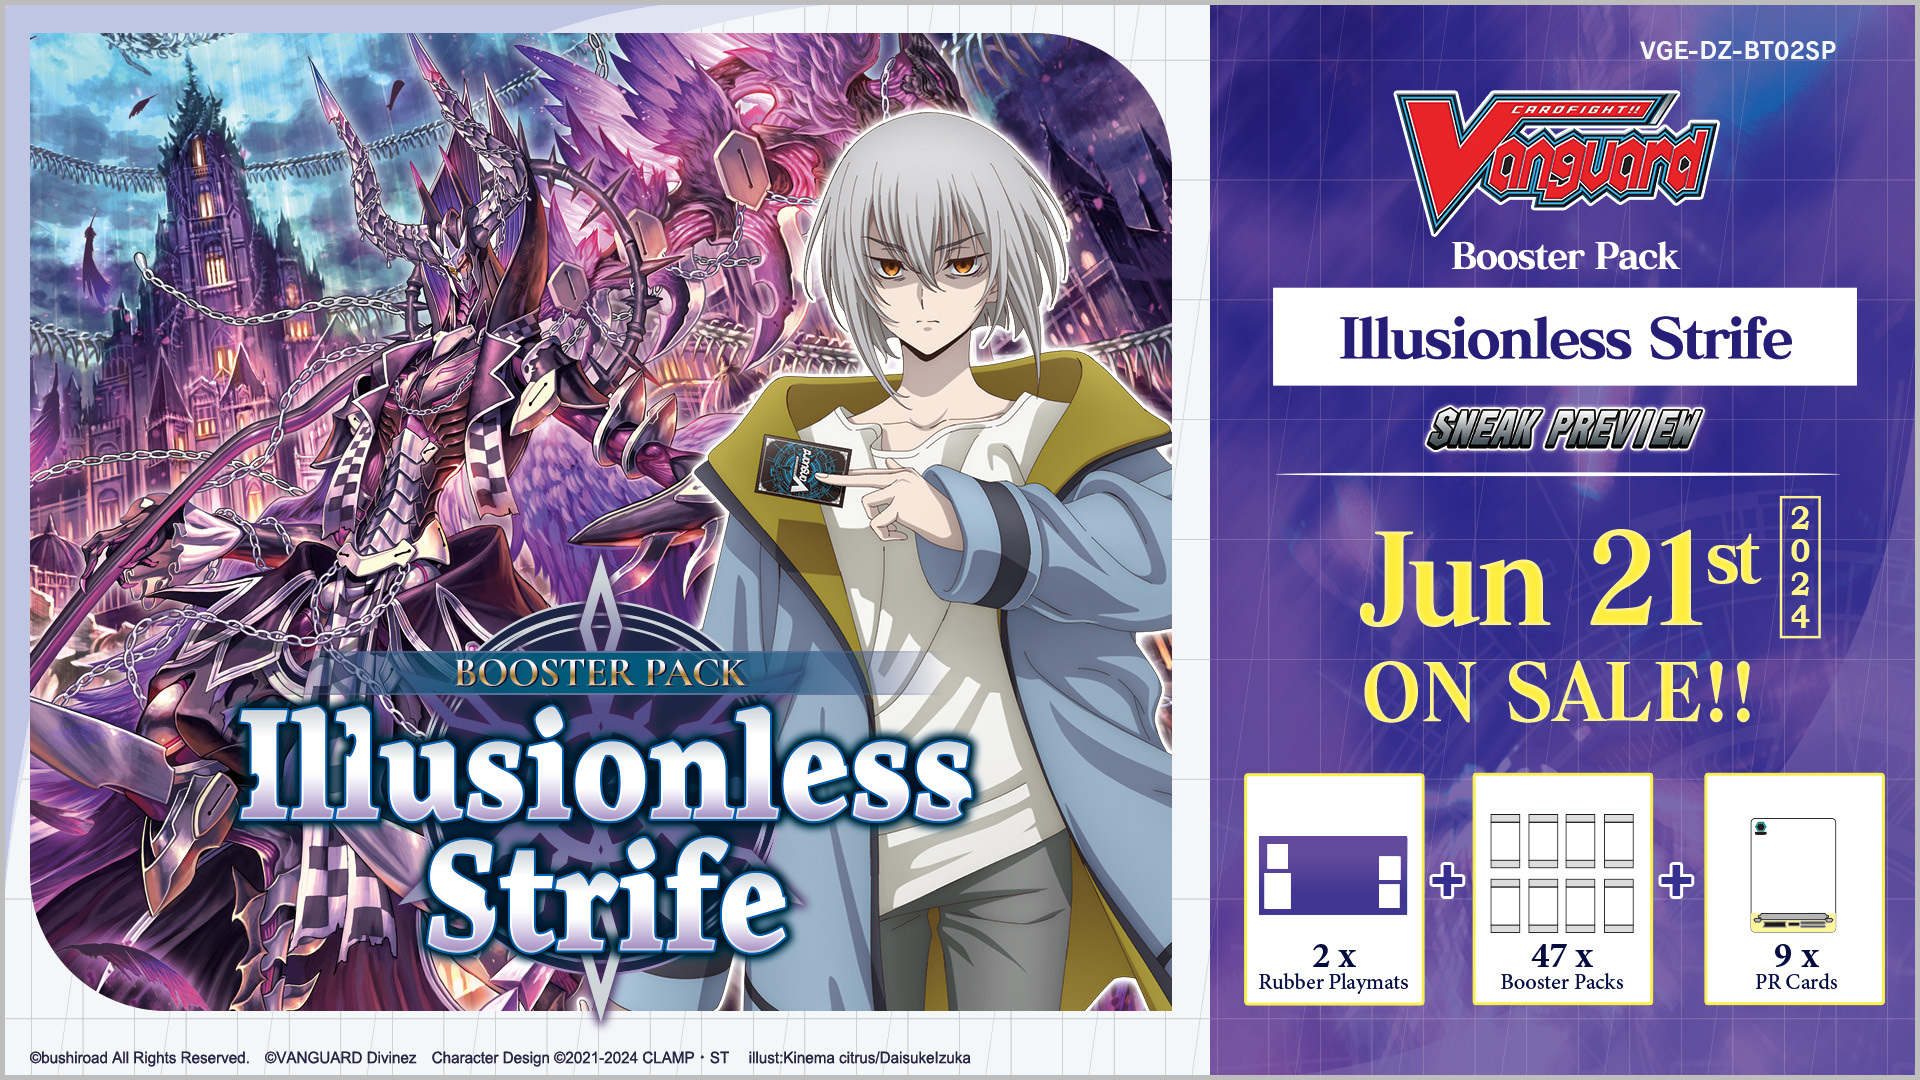 Cardfight!! Vanguard Booster Pack Illusion Strife Sneak Preview